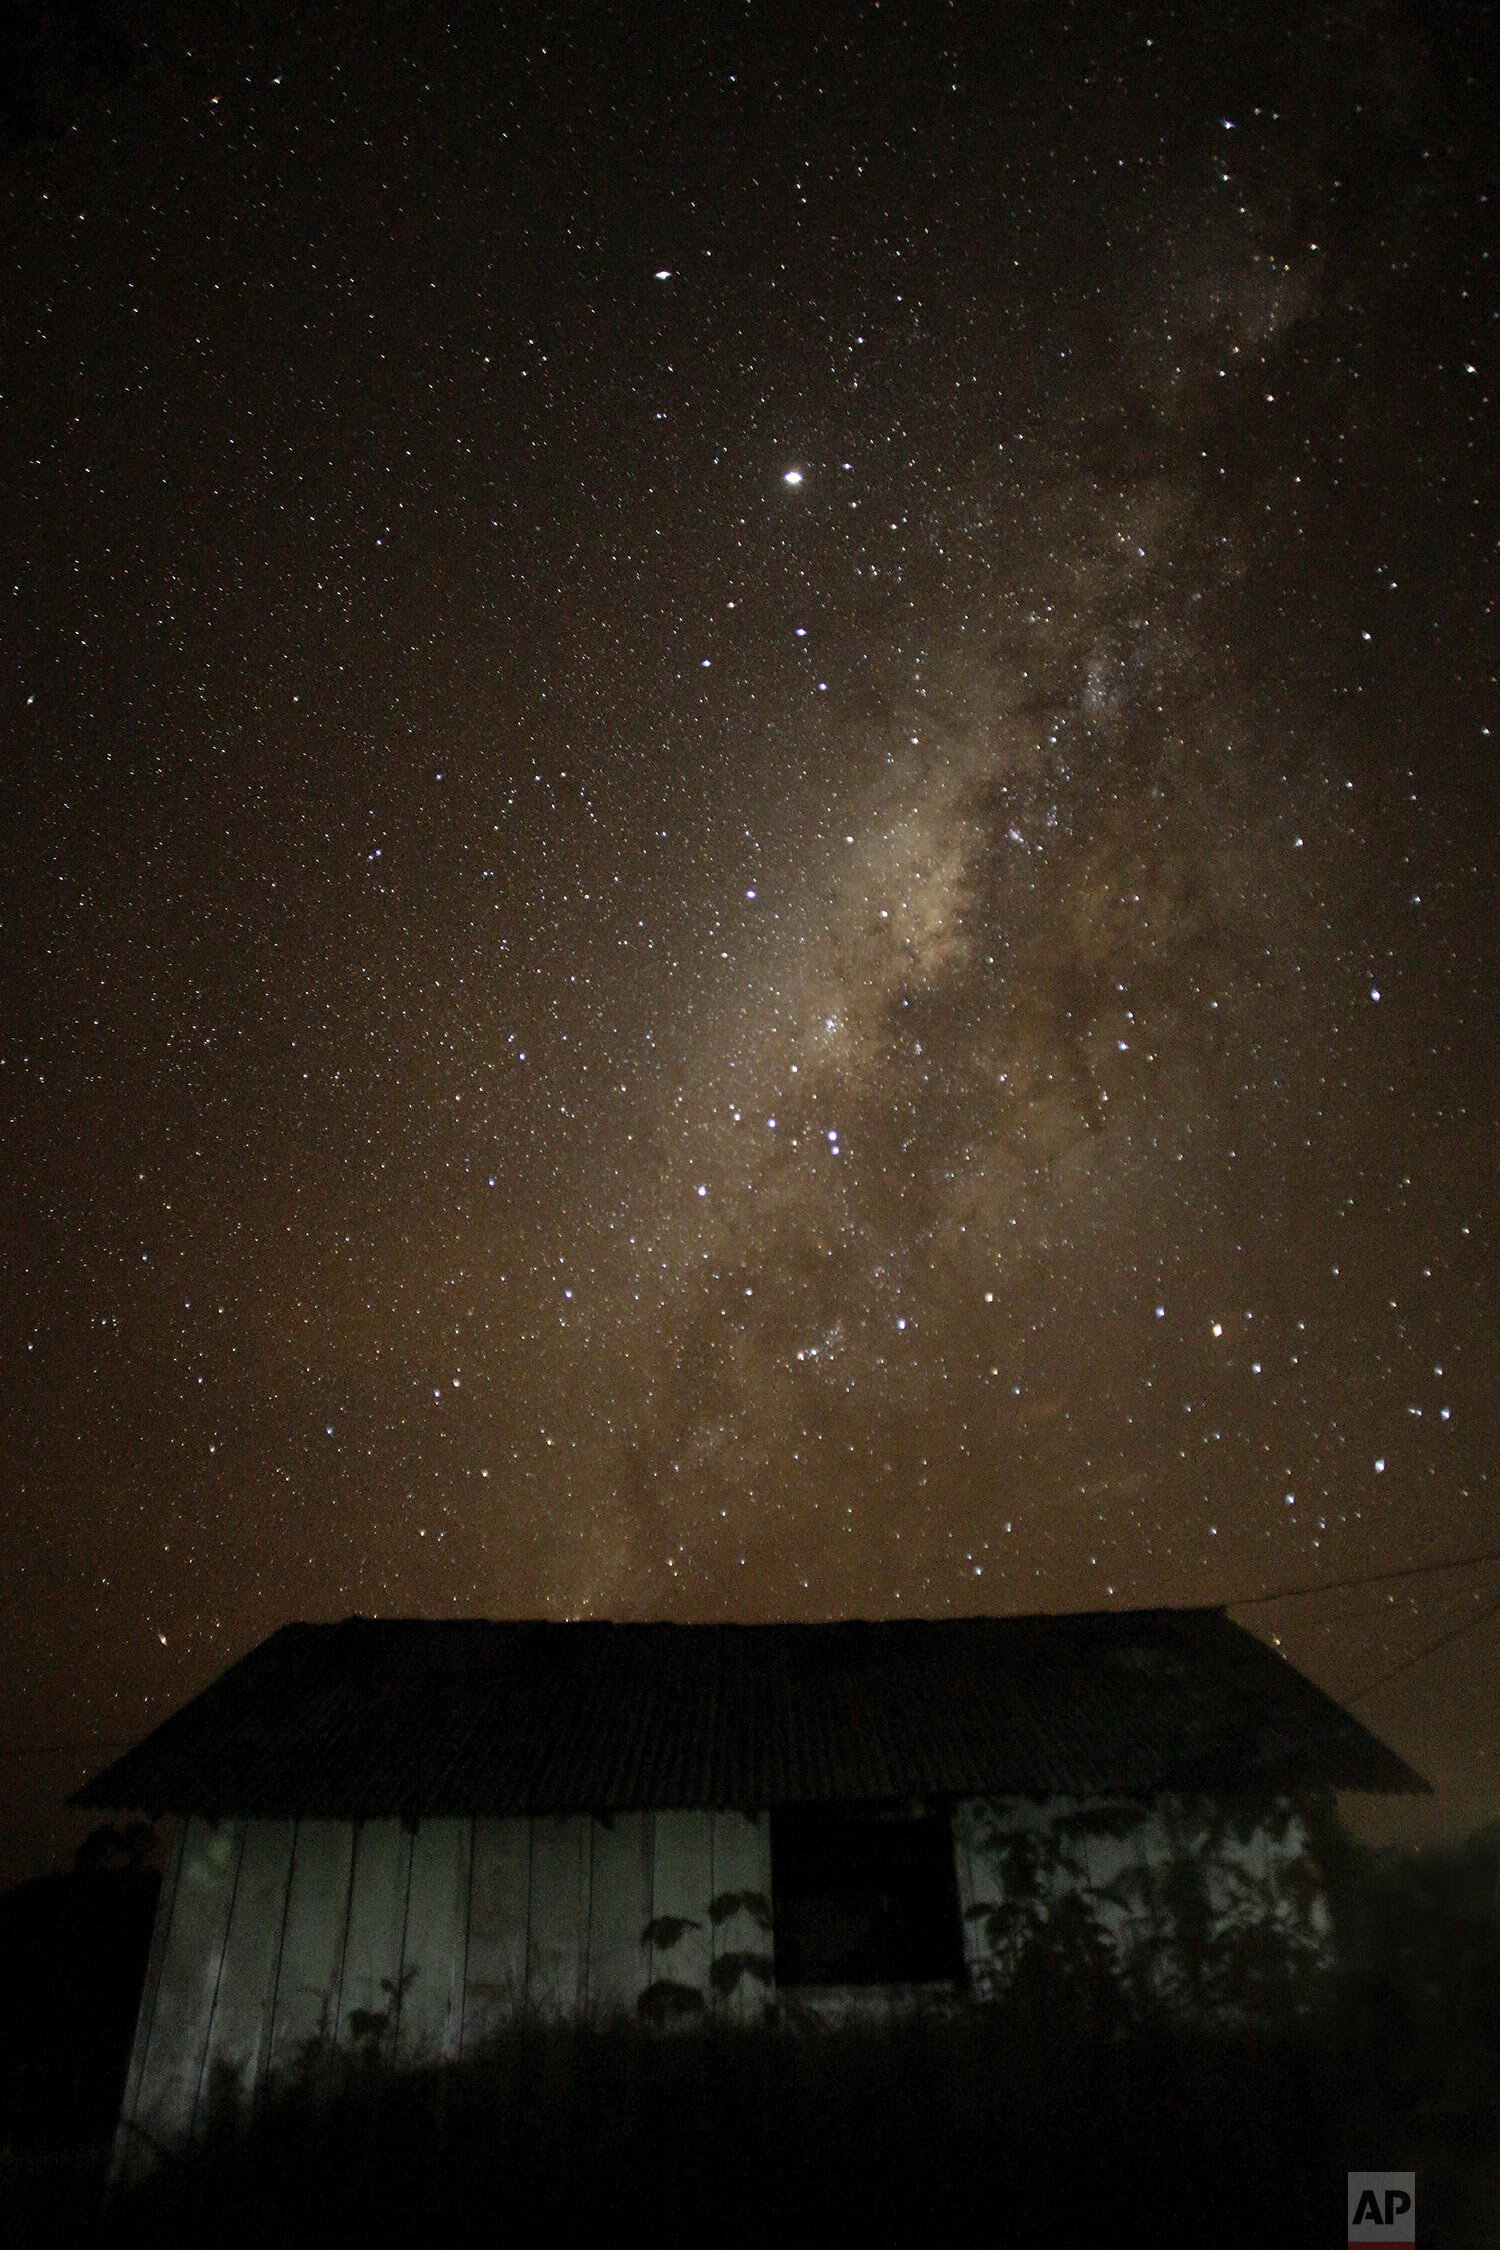  A view of the St. Benedict Chapel backdropped by a starlit night sky in the Alto Rio Guama Indigenous Reserve, where Tenetehara Indigenous have enforced six months of isolation during the coronavirus pandemic, near the city of Paragominas, Brazil, M